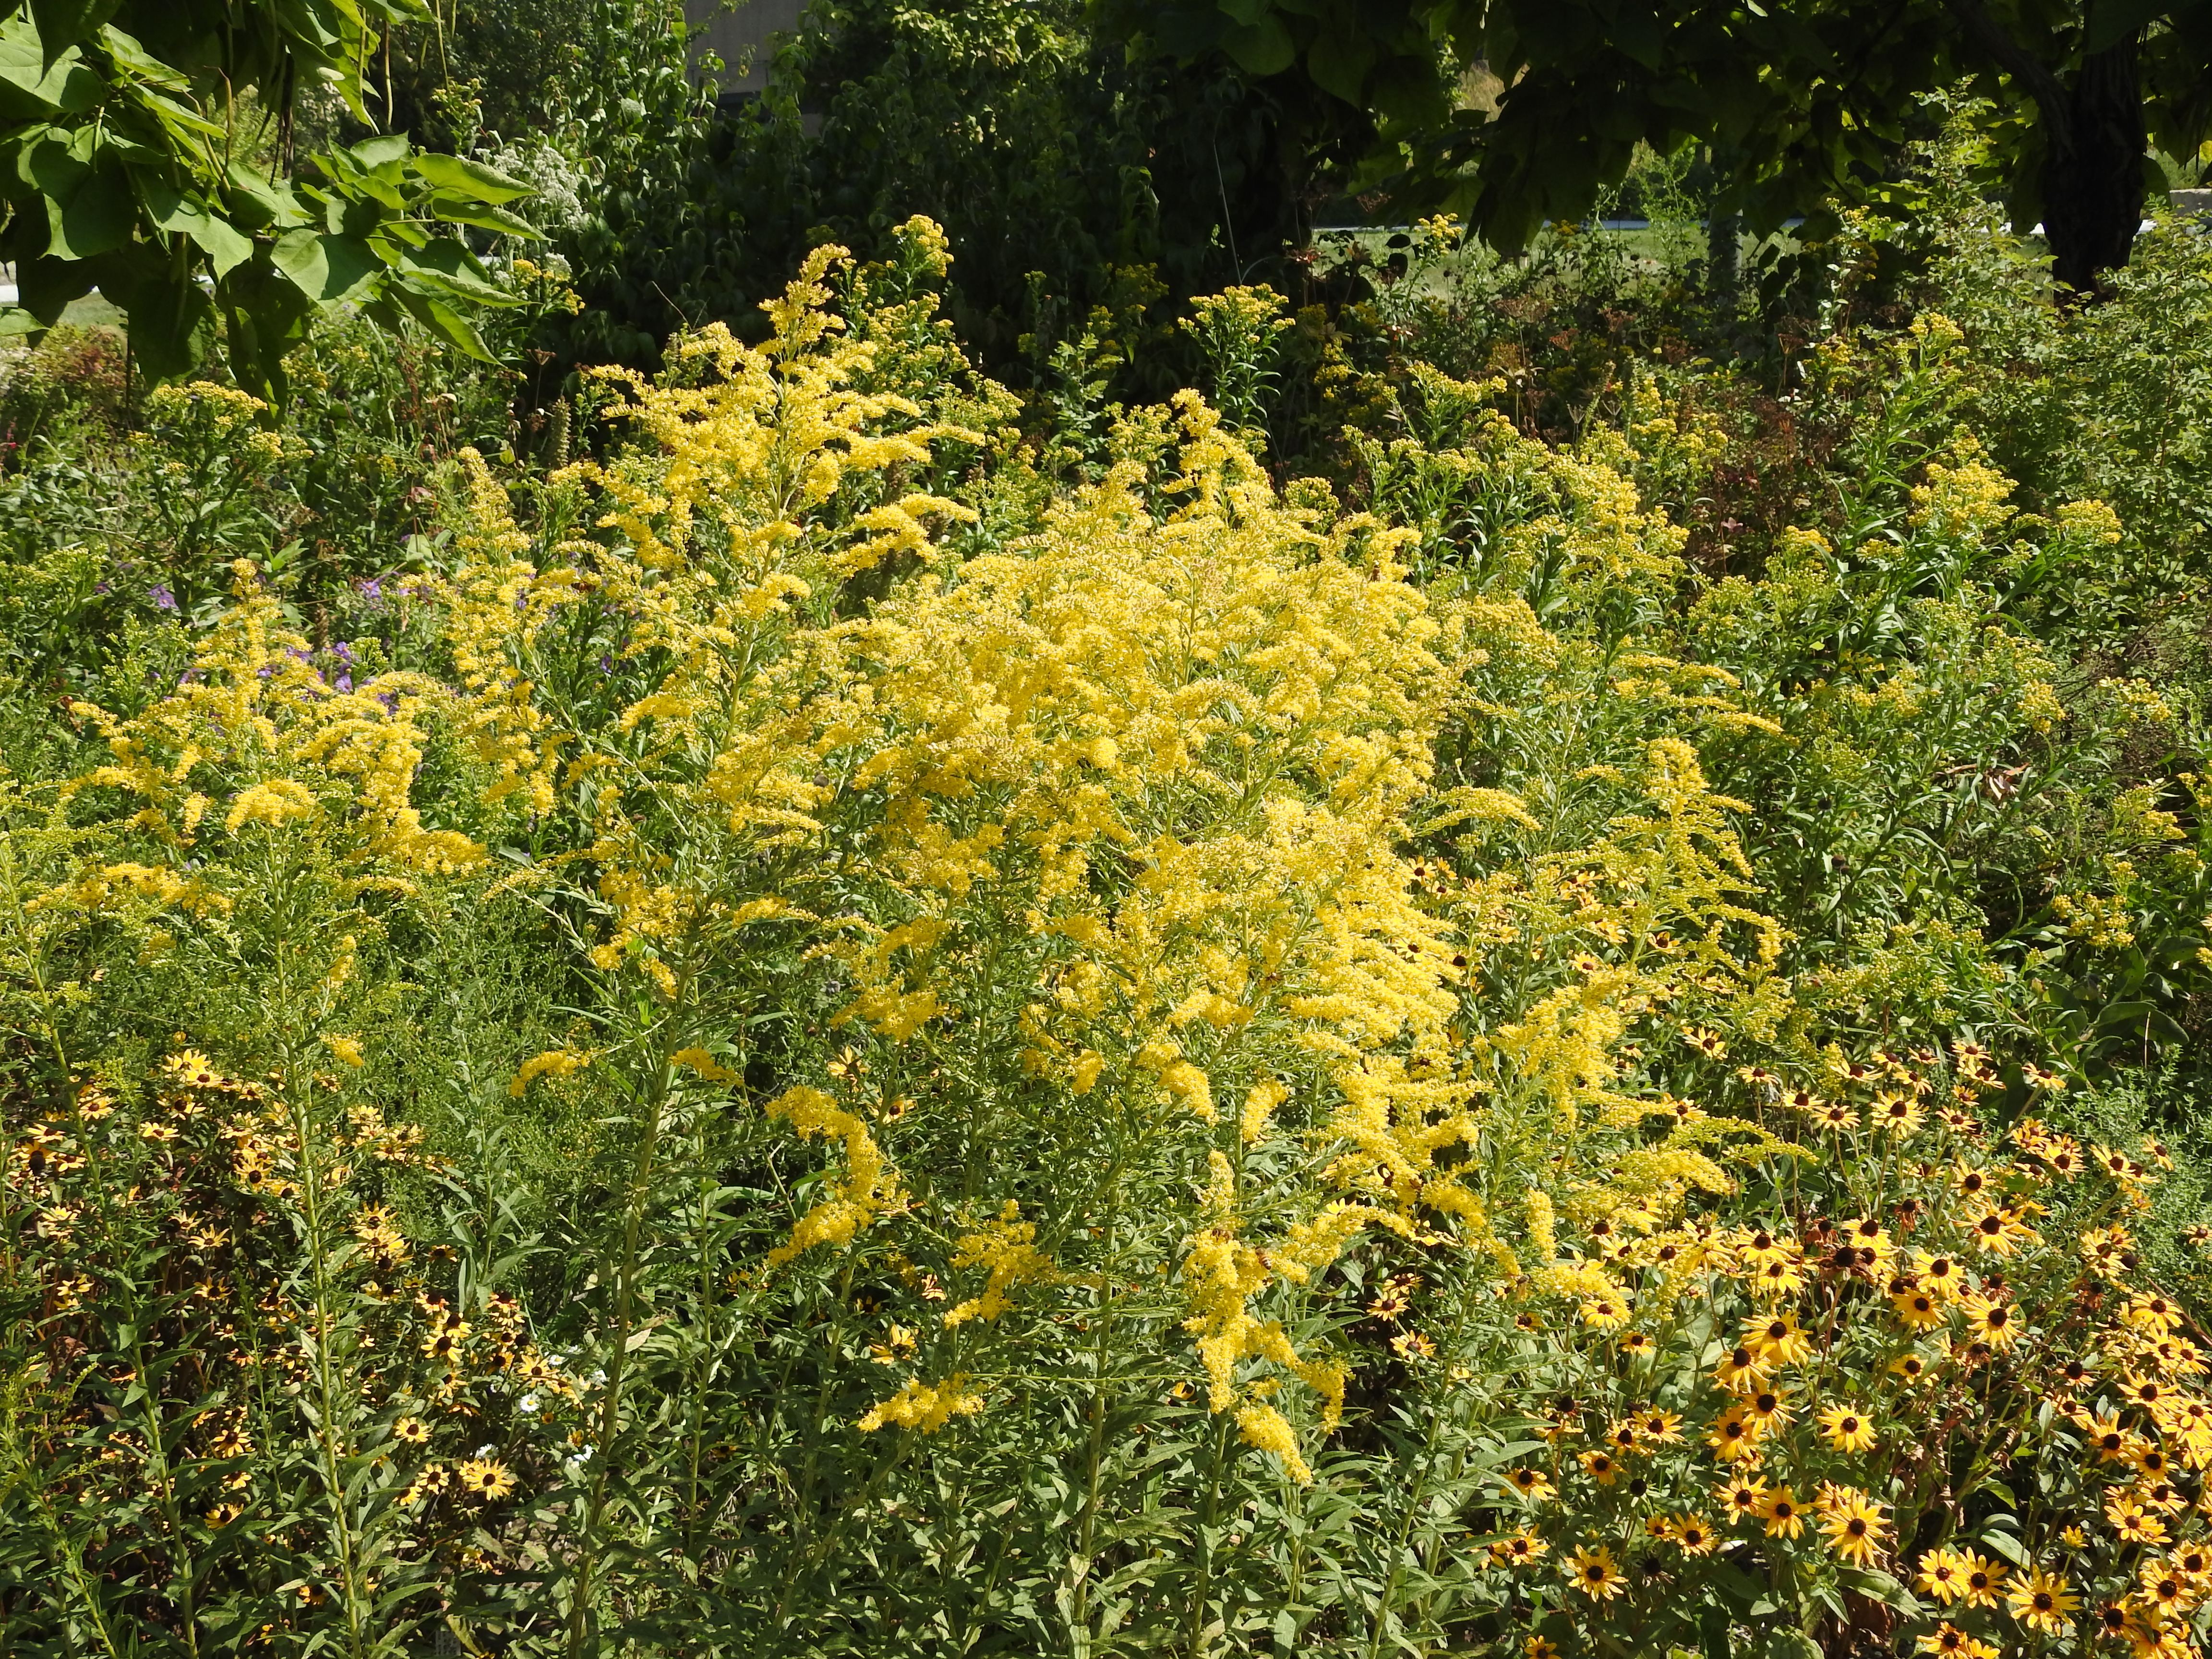 A green plant with yellow flowers